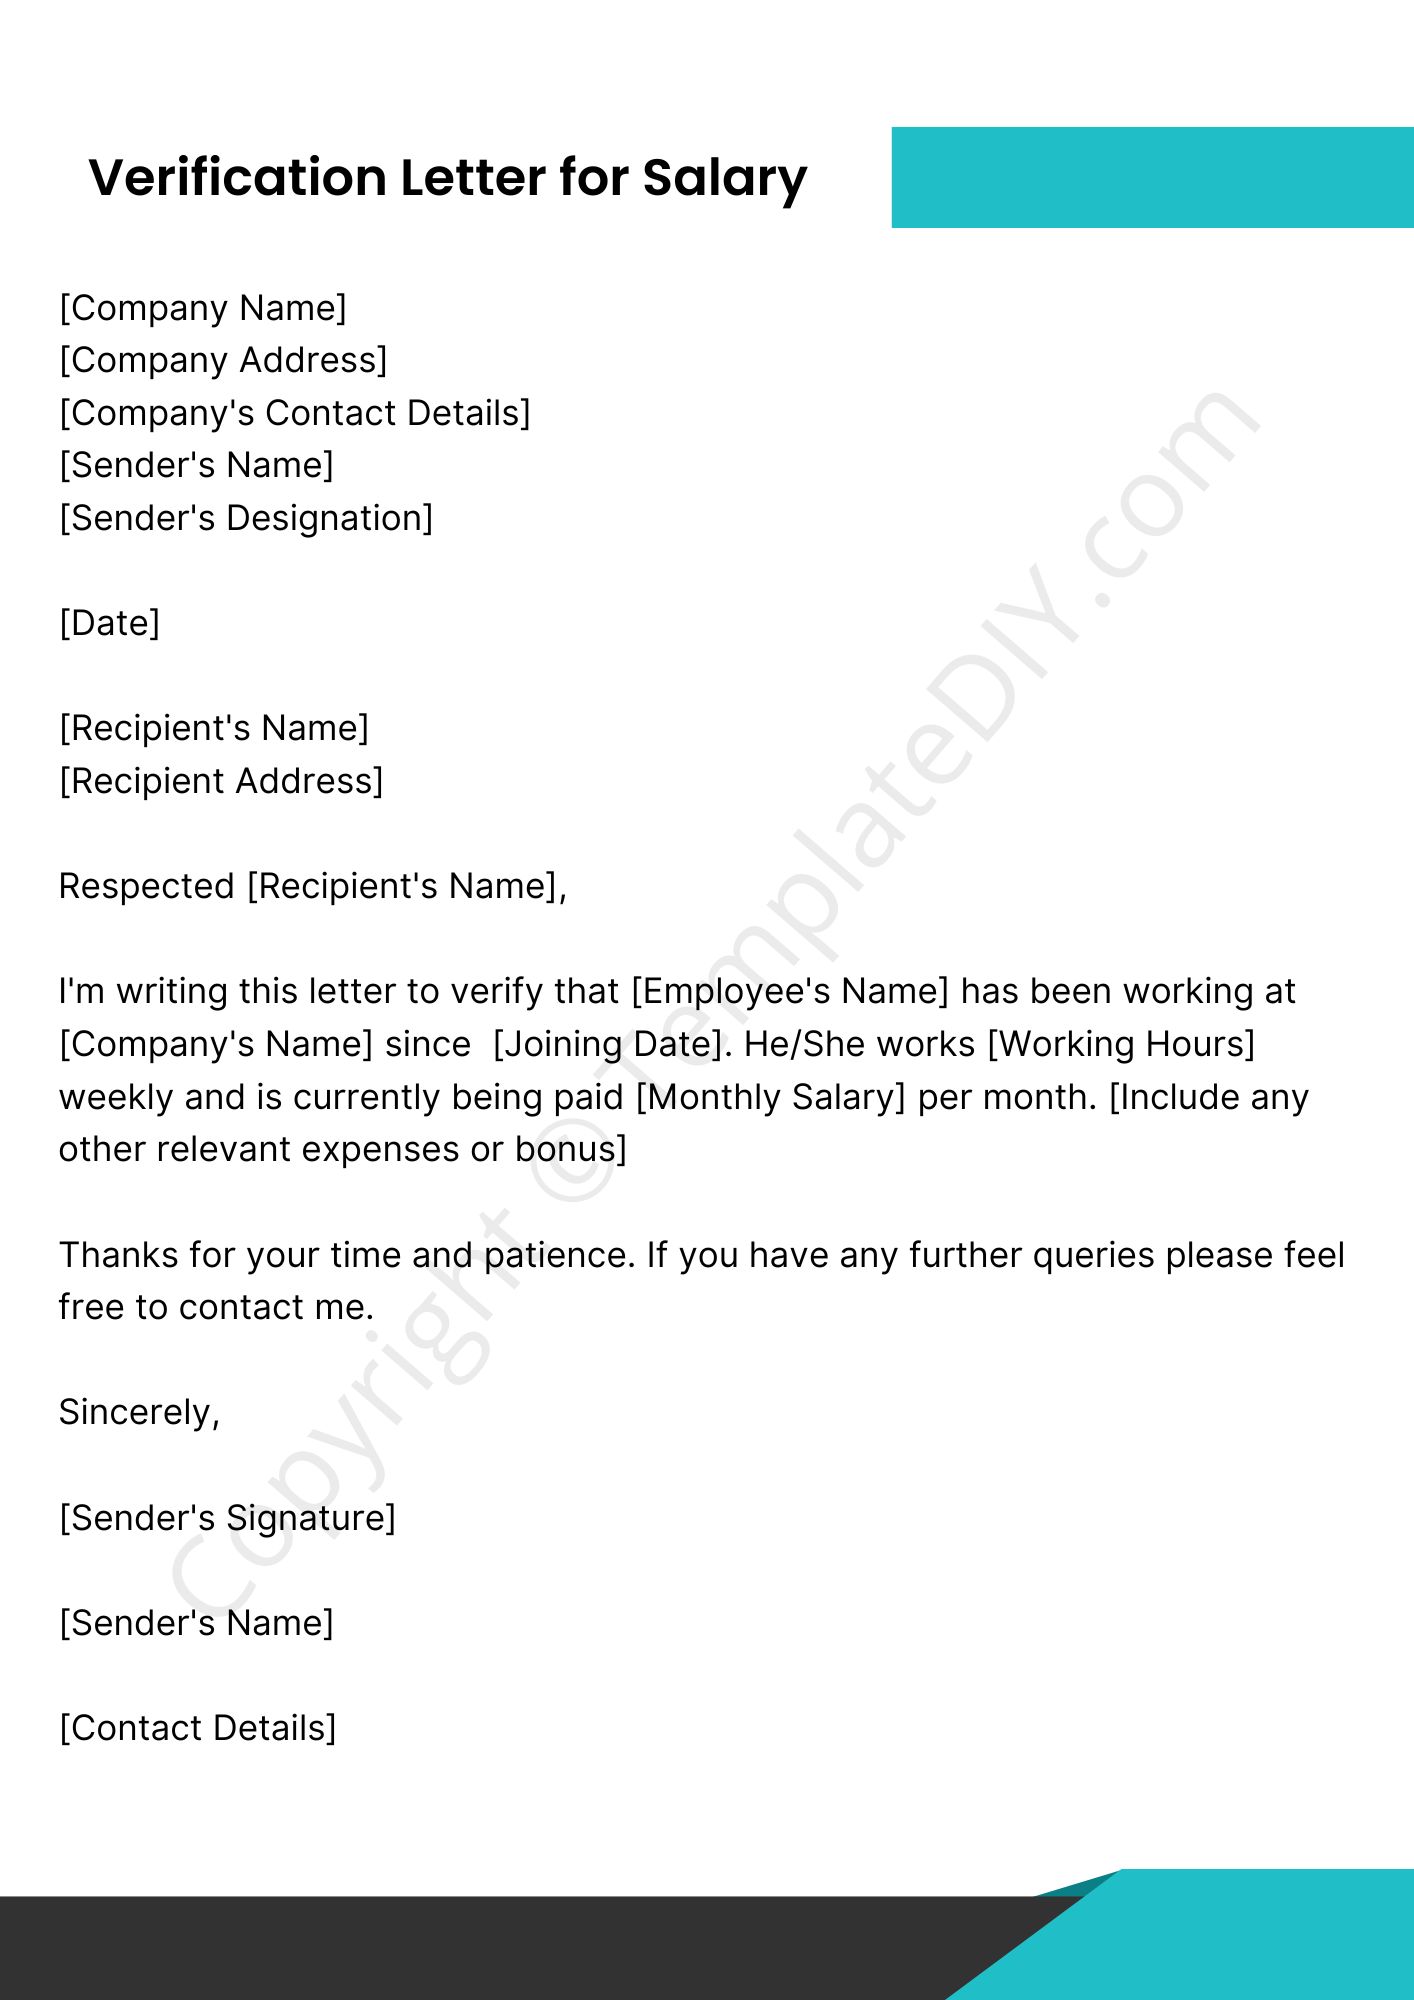 Employment Verification Letter With Salary Template